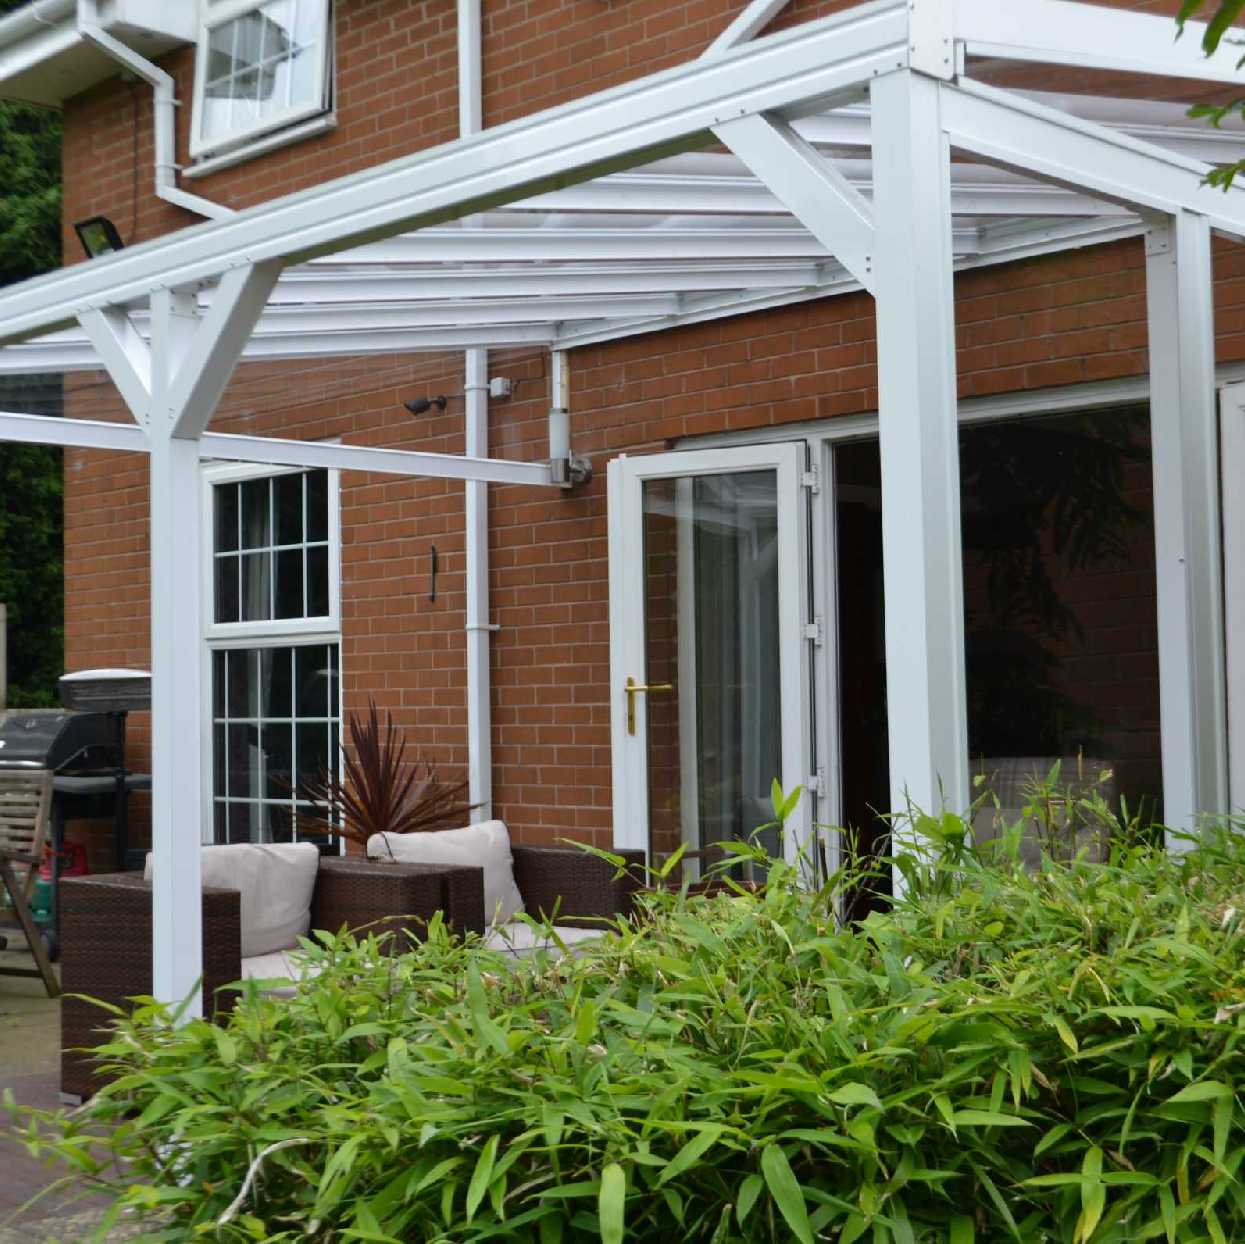 Omega Smart Lean-To Canopy, White with 6mm Glass Clear Plate Polycarbonate Glazing - 7.7m (W) x 2.5m (P), (4) Supporting Posts from Omega Build